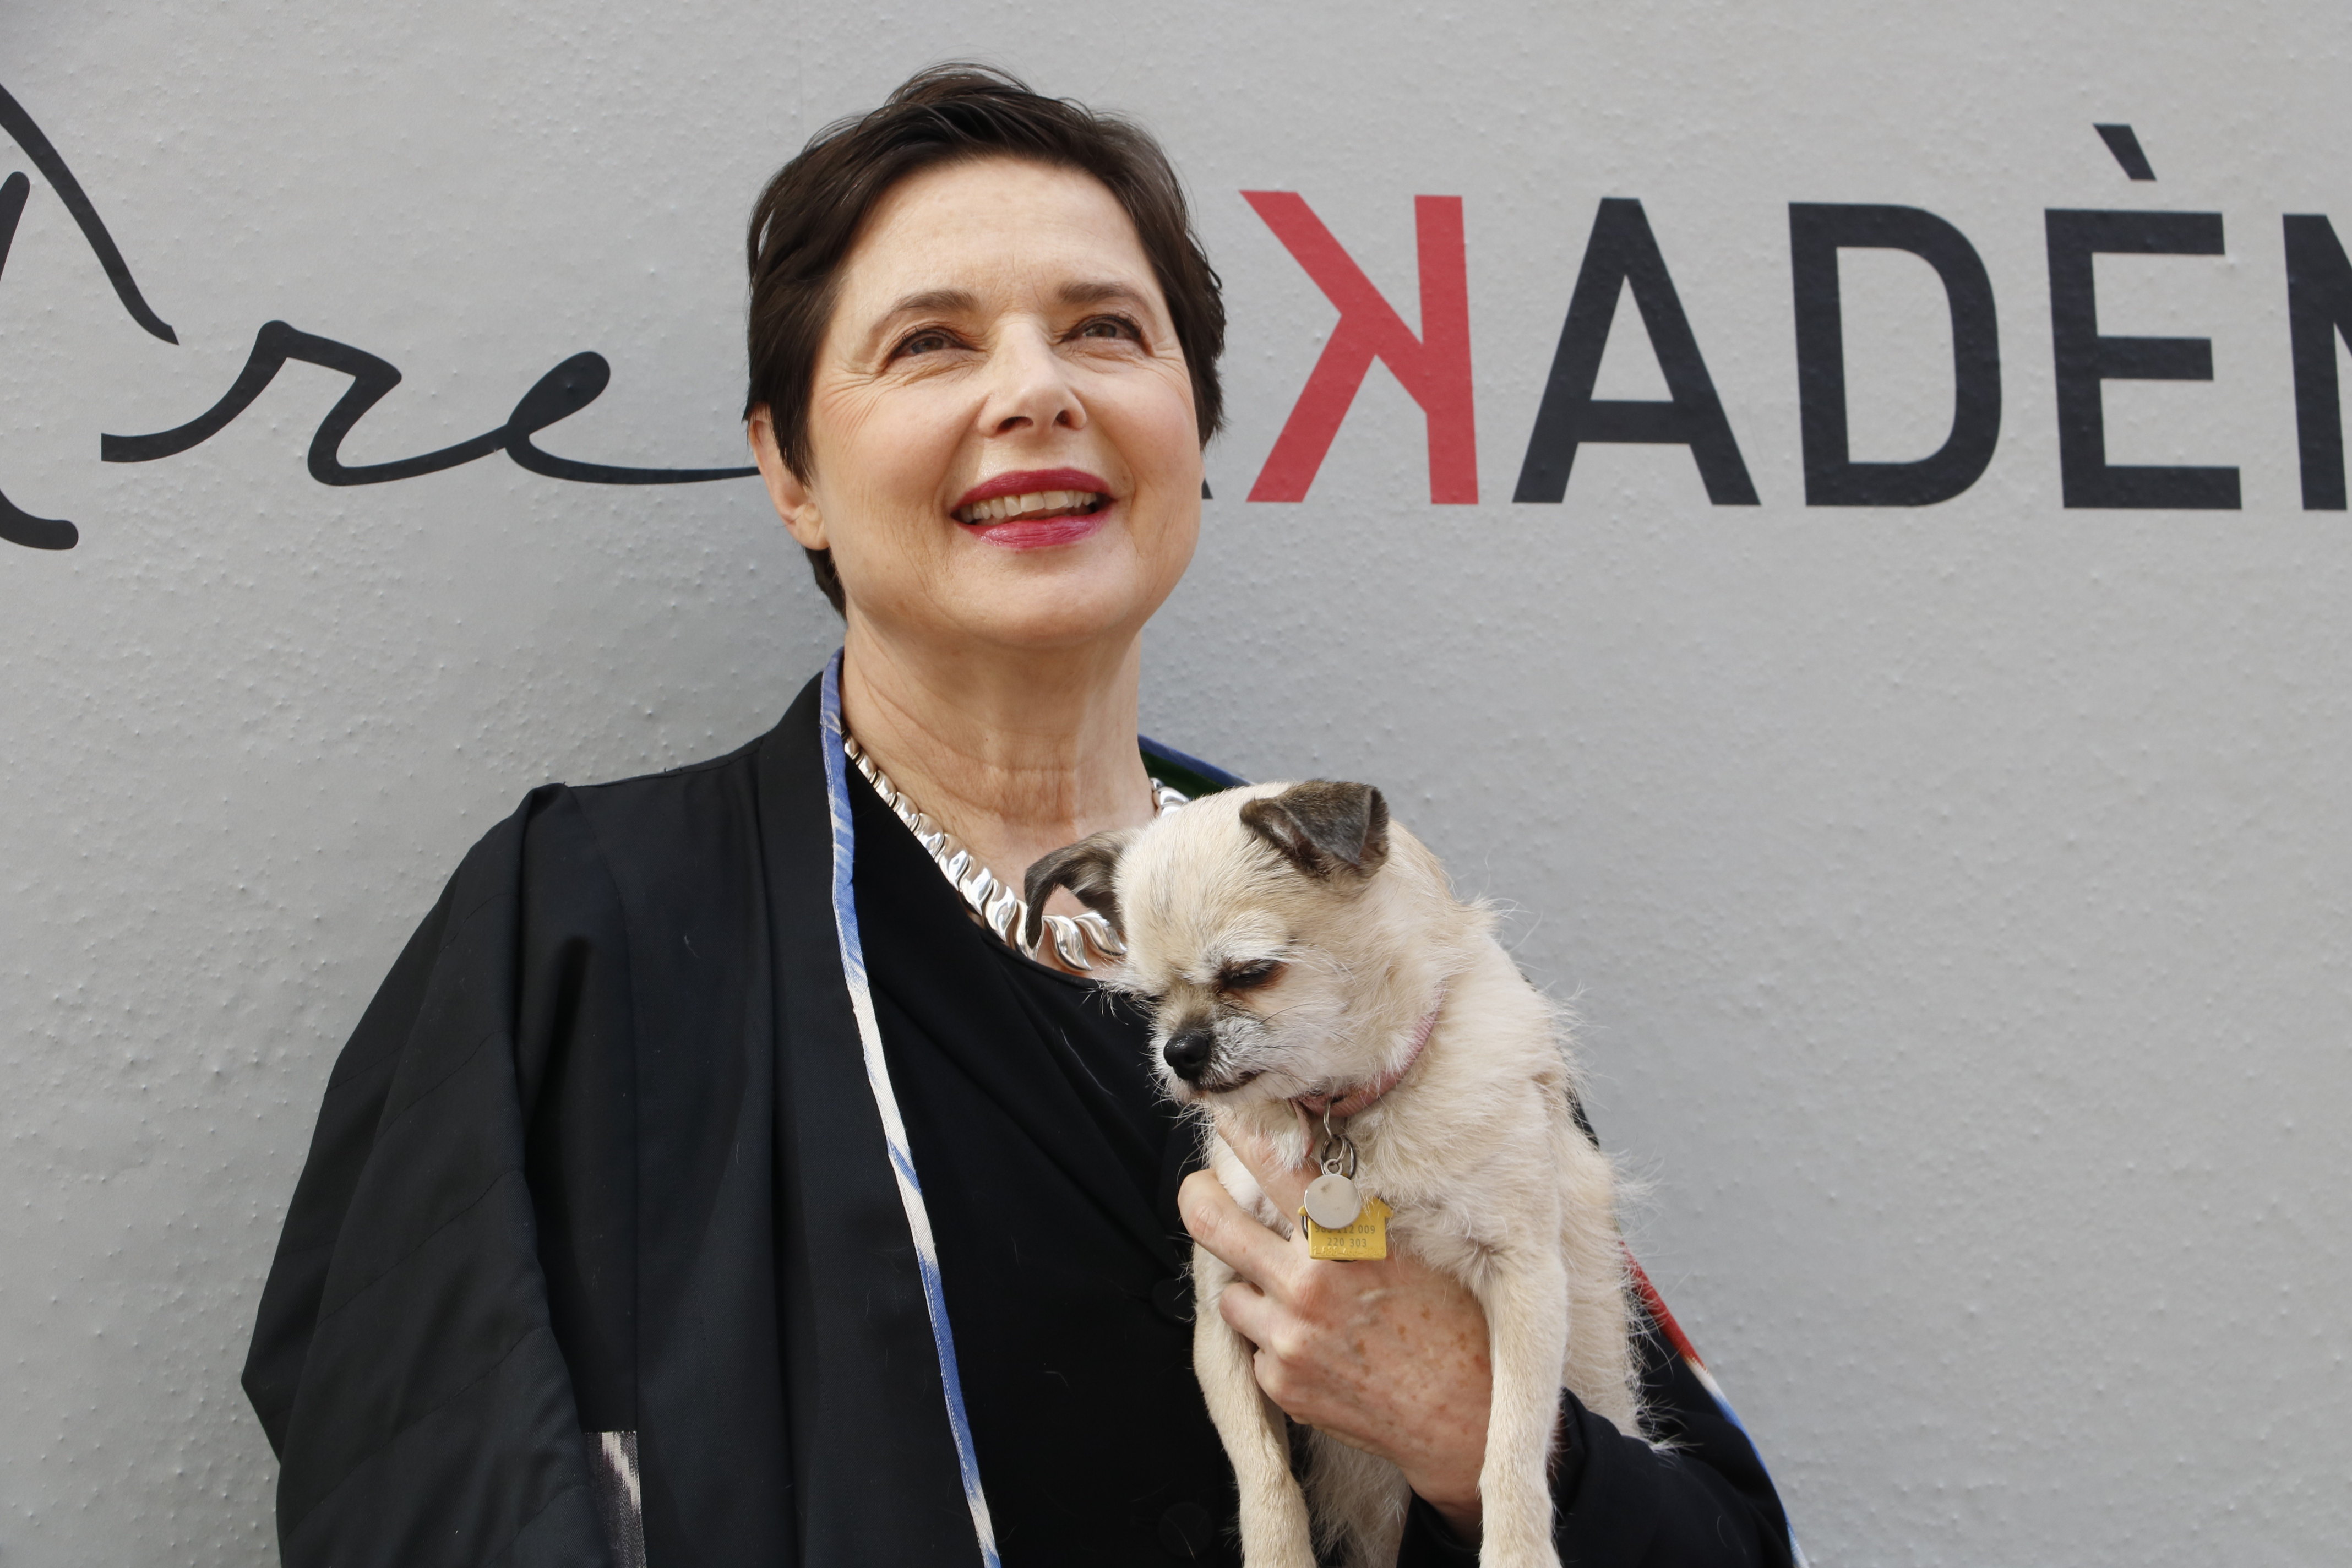 Actress Isabella Rossellini at the presentation for 'Link Link Circus' on March 12 2018 (by Guillem Roset)